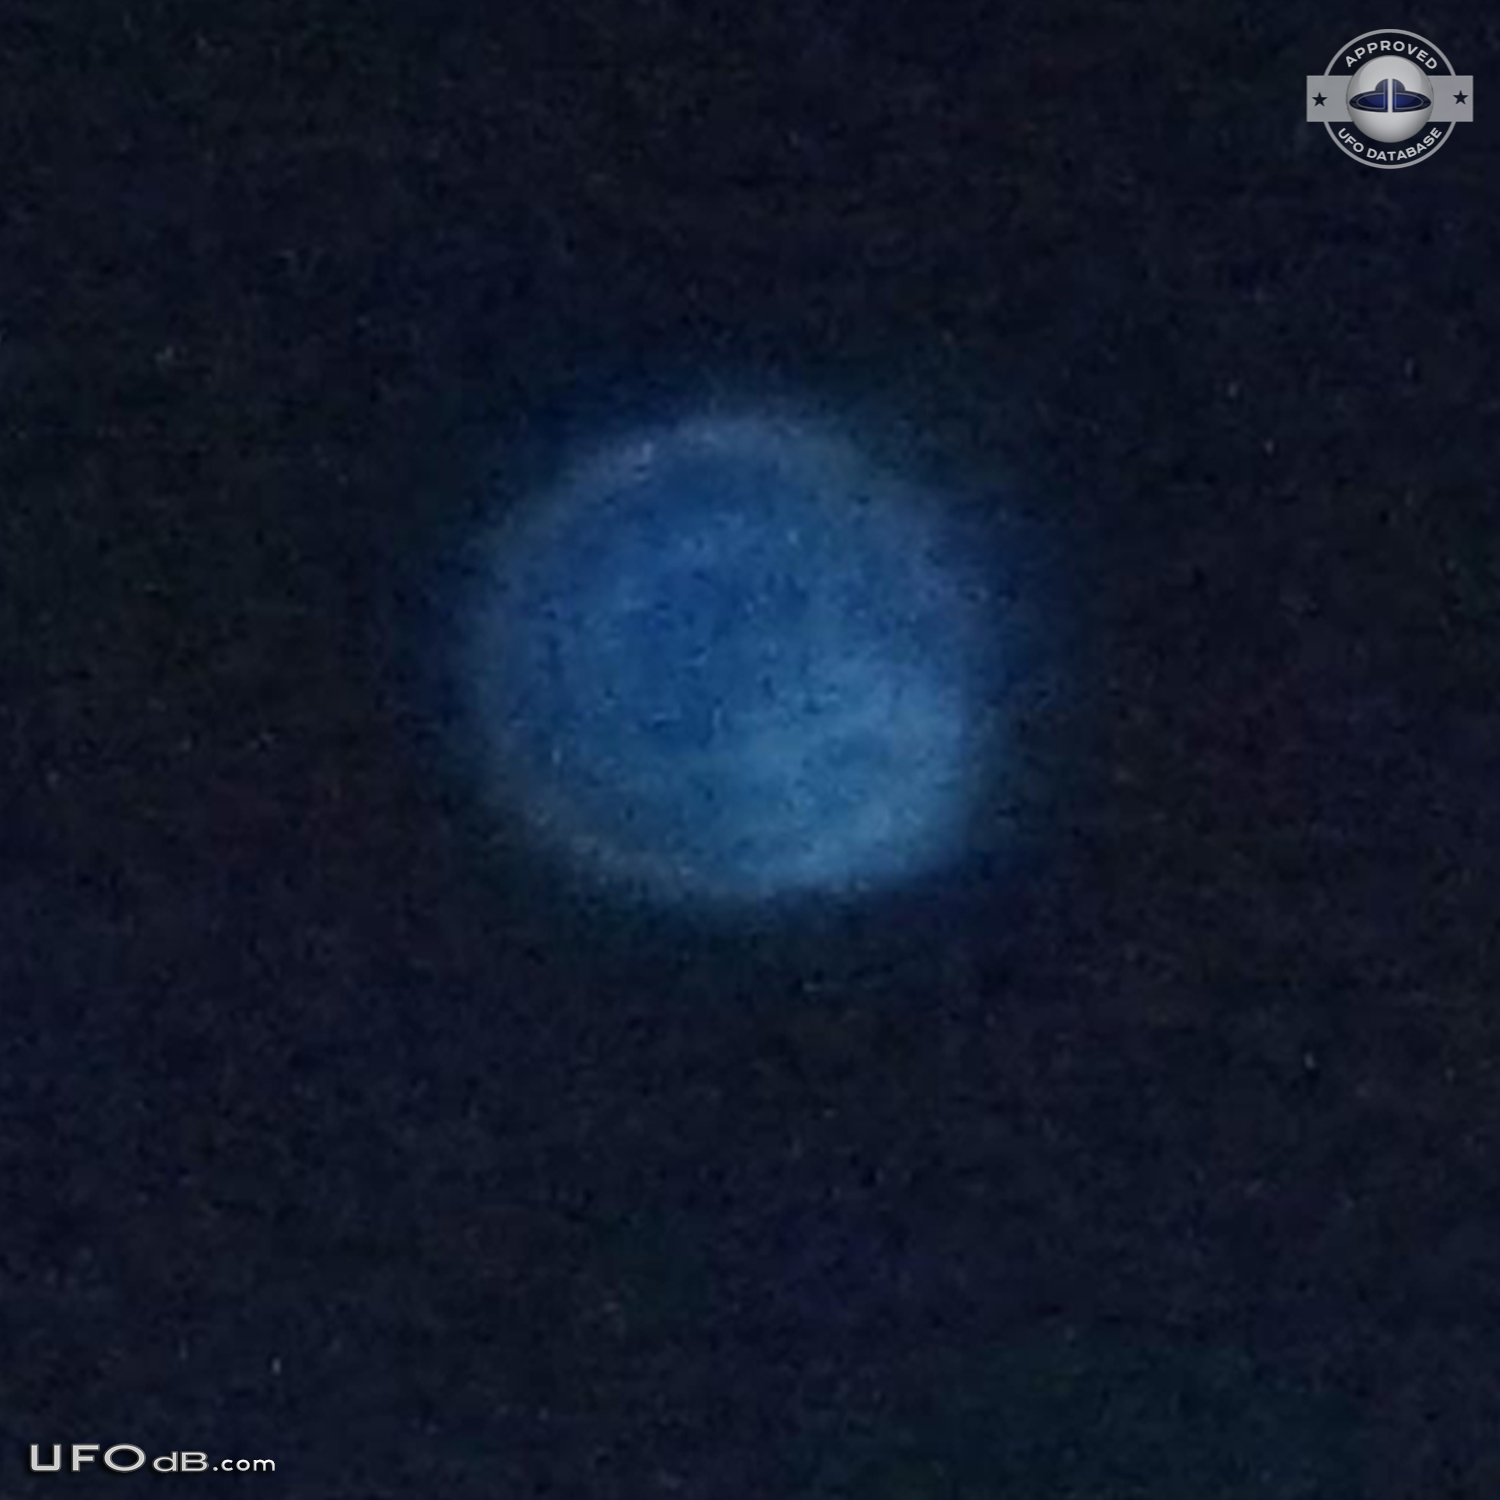 Blue round UFO appears on photo over buildings - Catalonia, Spain 2012 UFO Picture #407-4